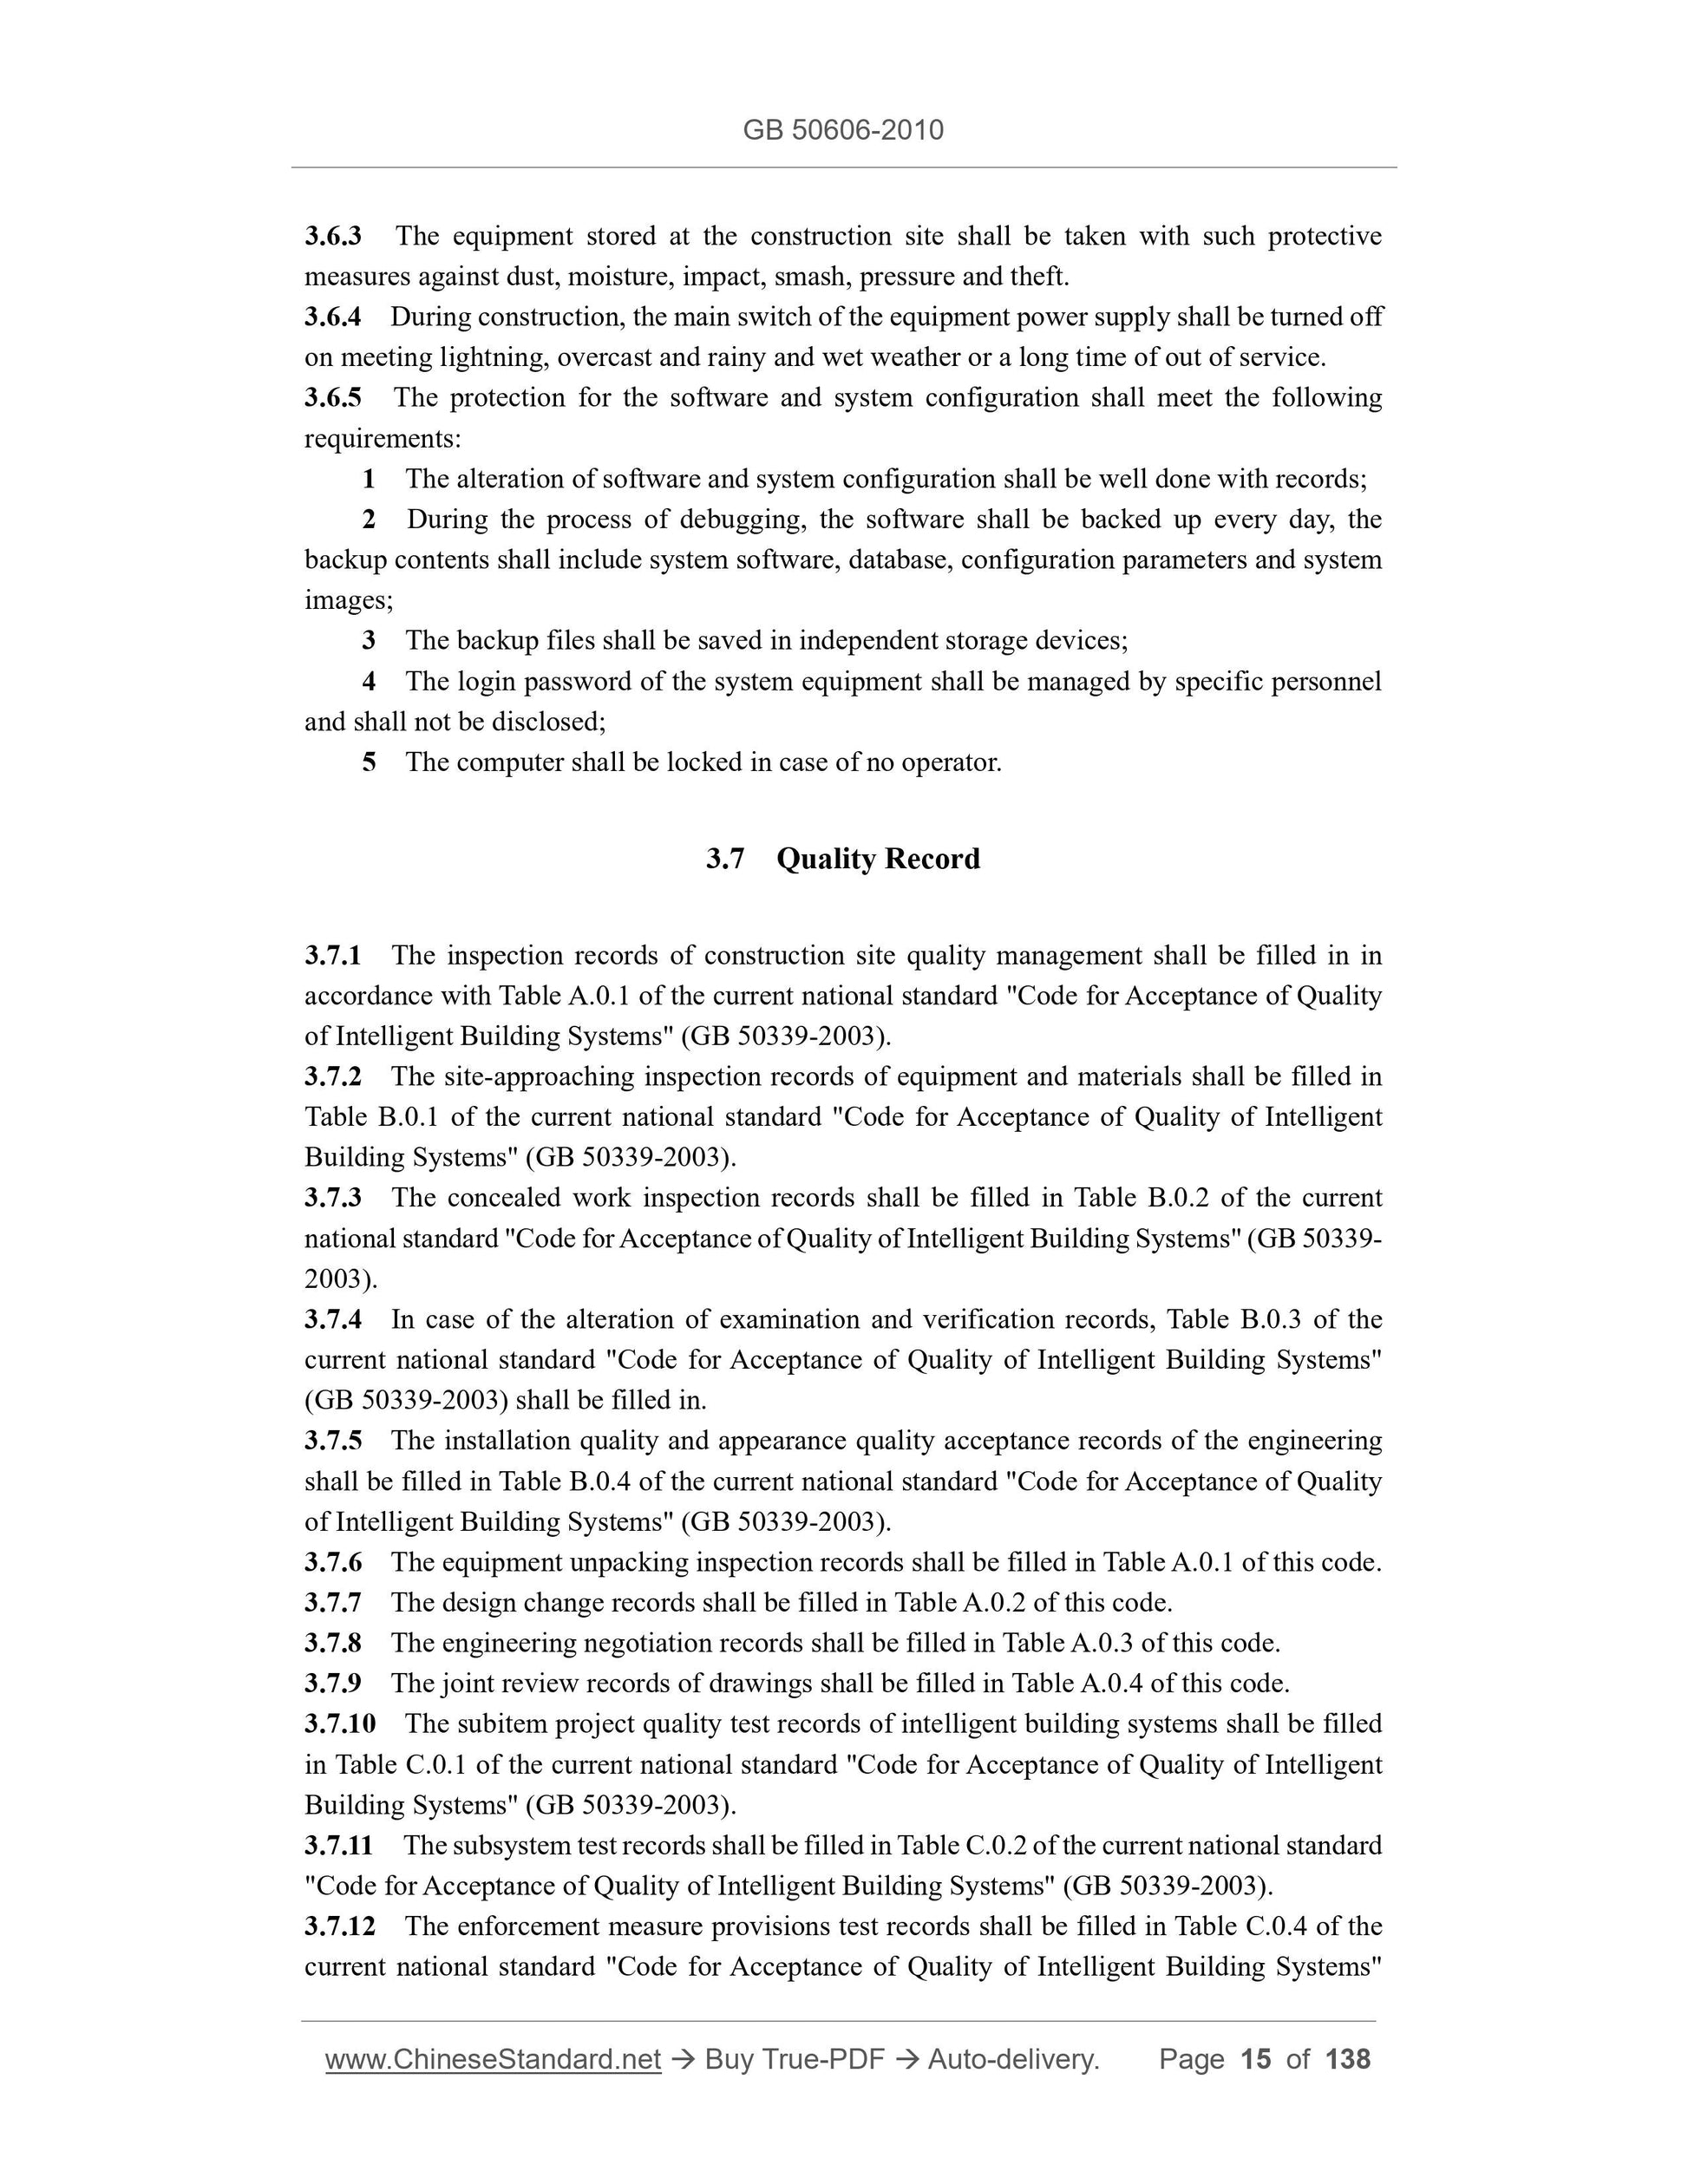 GB 50606-2010 Page 8